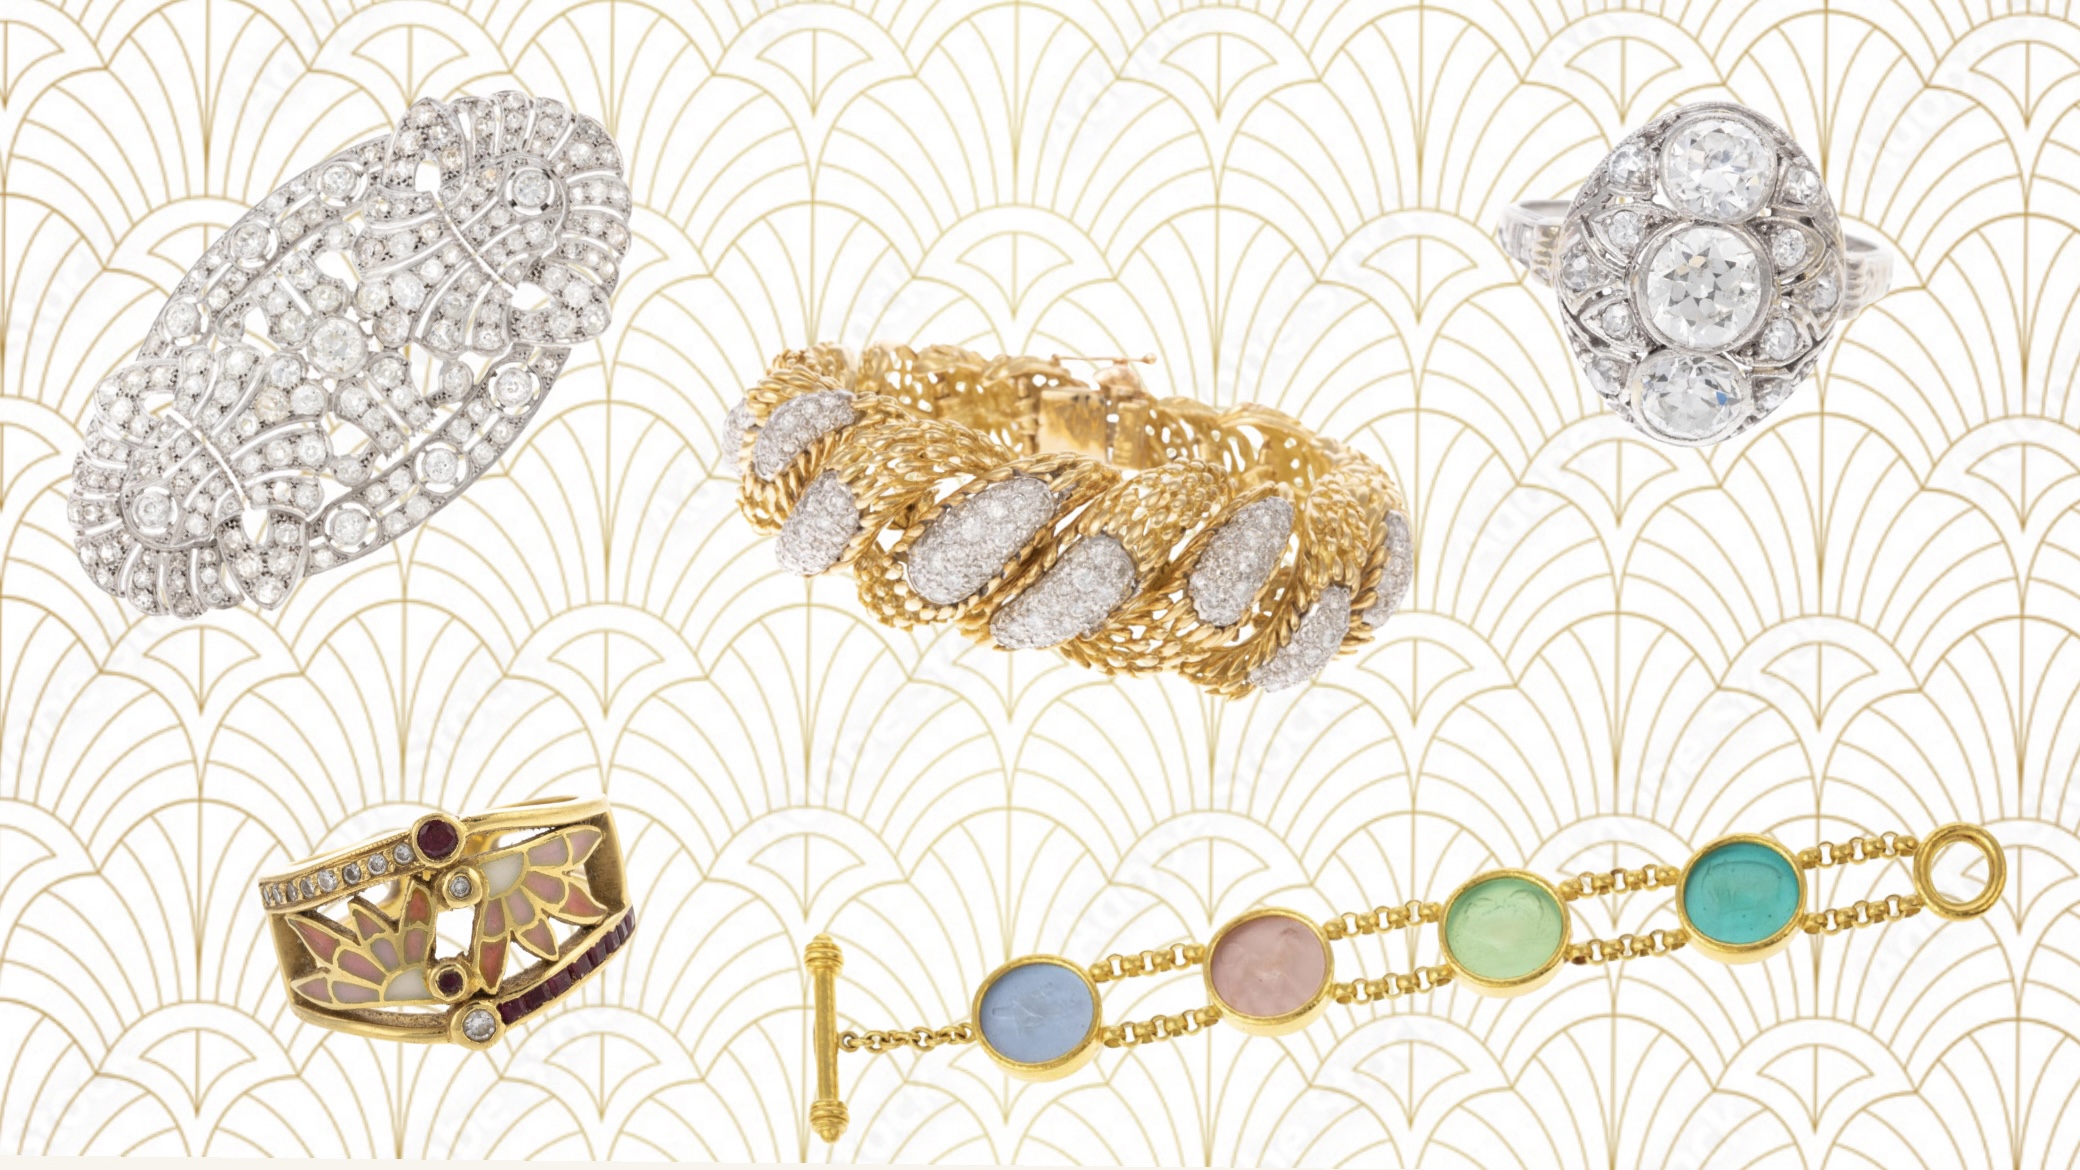 Jewelry Highlights from the May 12th Gallery Auction